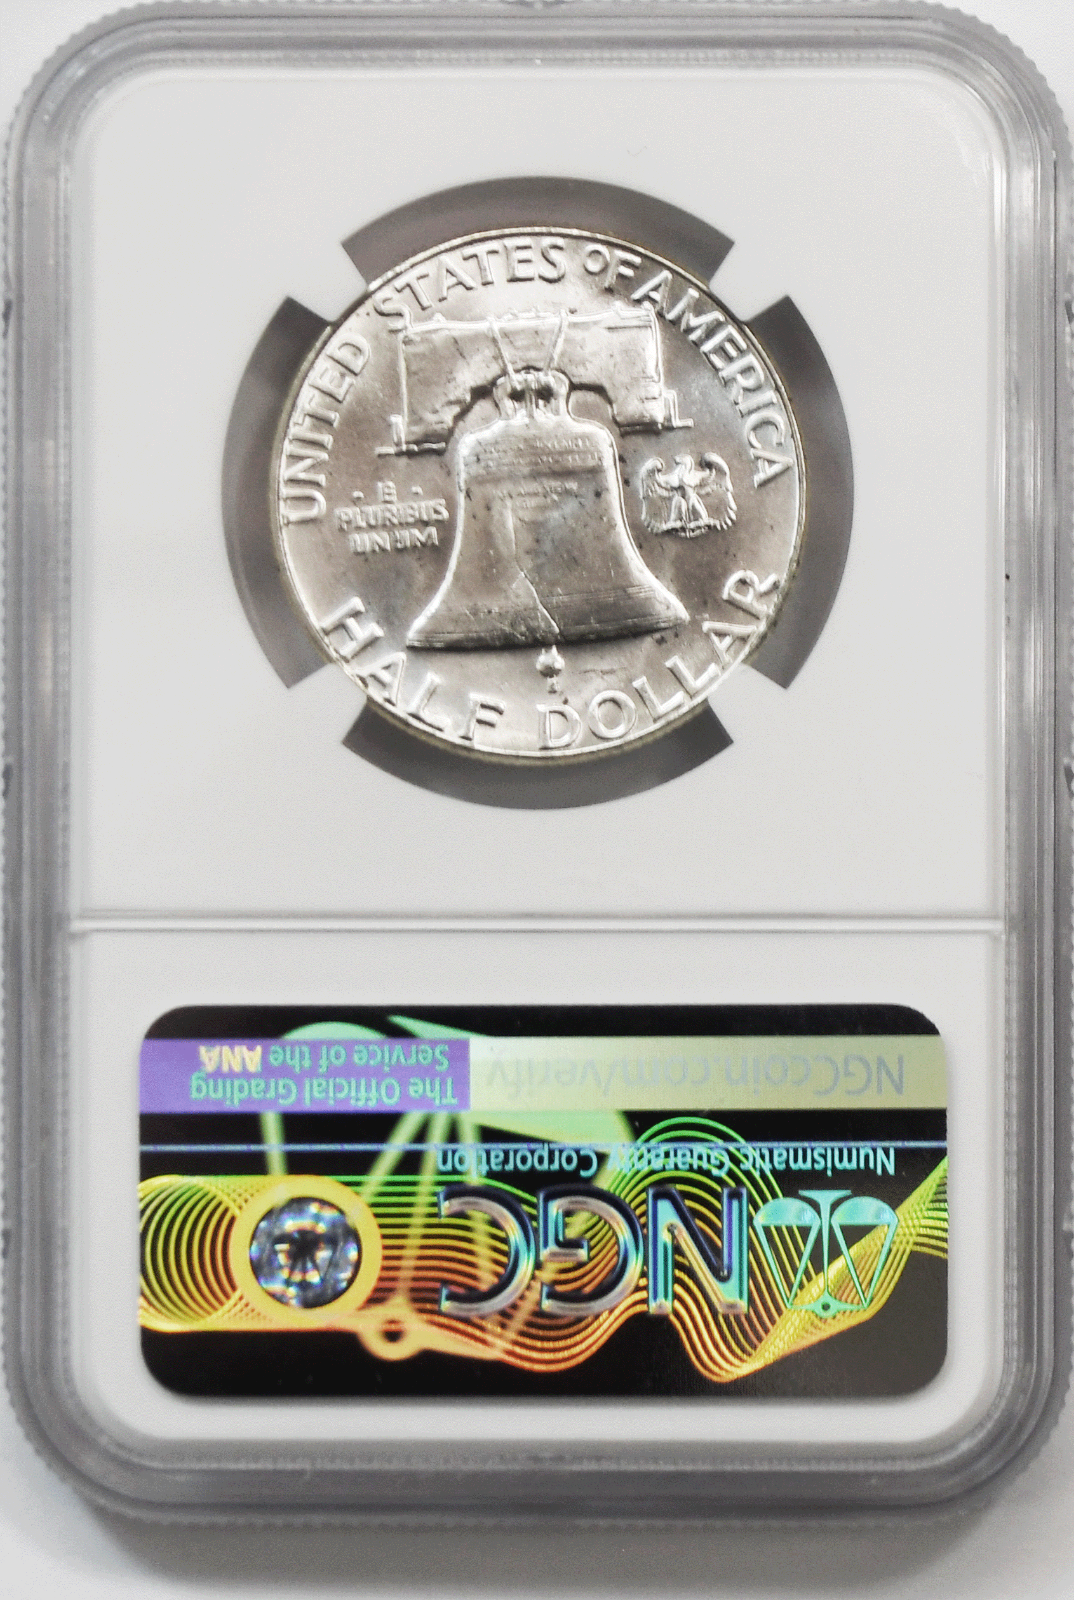 1963 50c Franklin Silver Half Dollar Fifty Cents NGC MS65